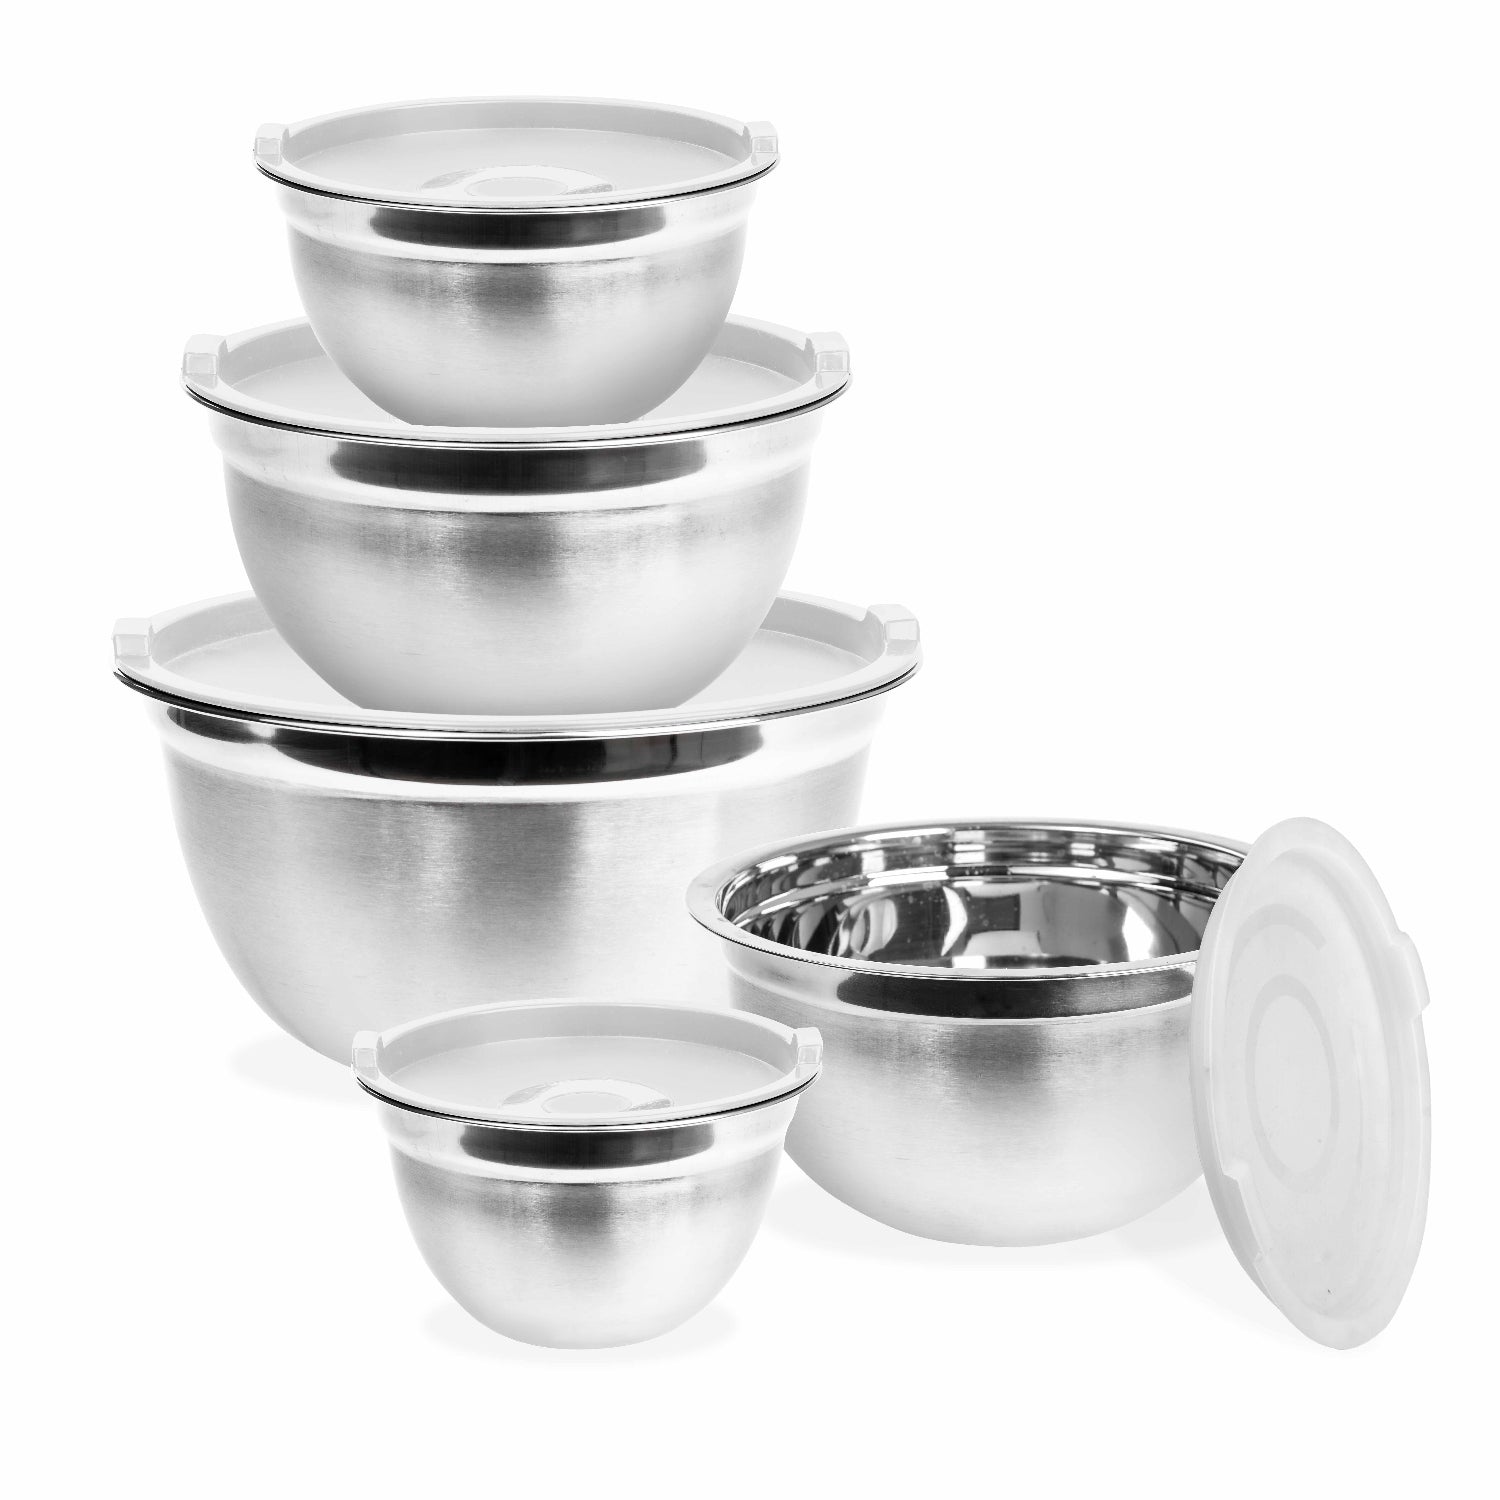 Vsssj Mixing Bowls with Lids - 5 Deep Nesting Mixing Bowls for Kitchen Storage - Silver Stainless Steel Mixing Bowl Set - Large Mixing Bowl for